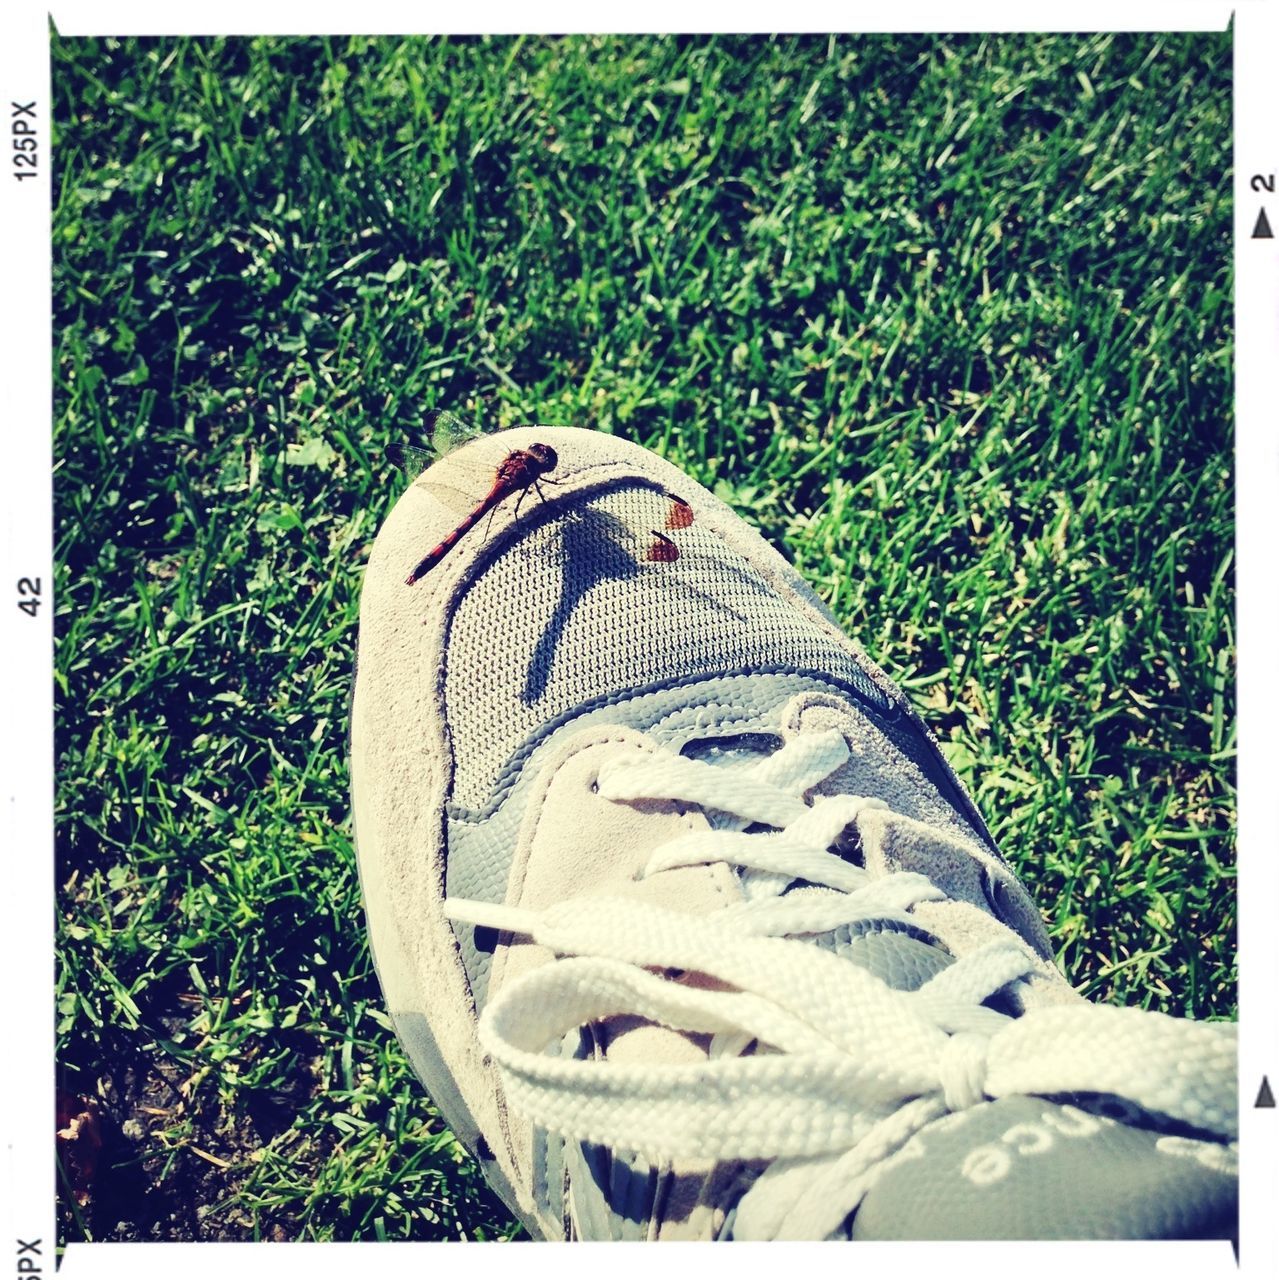 transfer print, auto post production filter, grass, field, high angle view, shoe, close-up, grassy, green color, outdoors, day, footwear, plant, sunlight, no people, growth, nature, pair, low section, part of